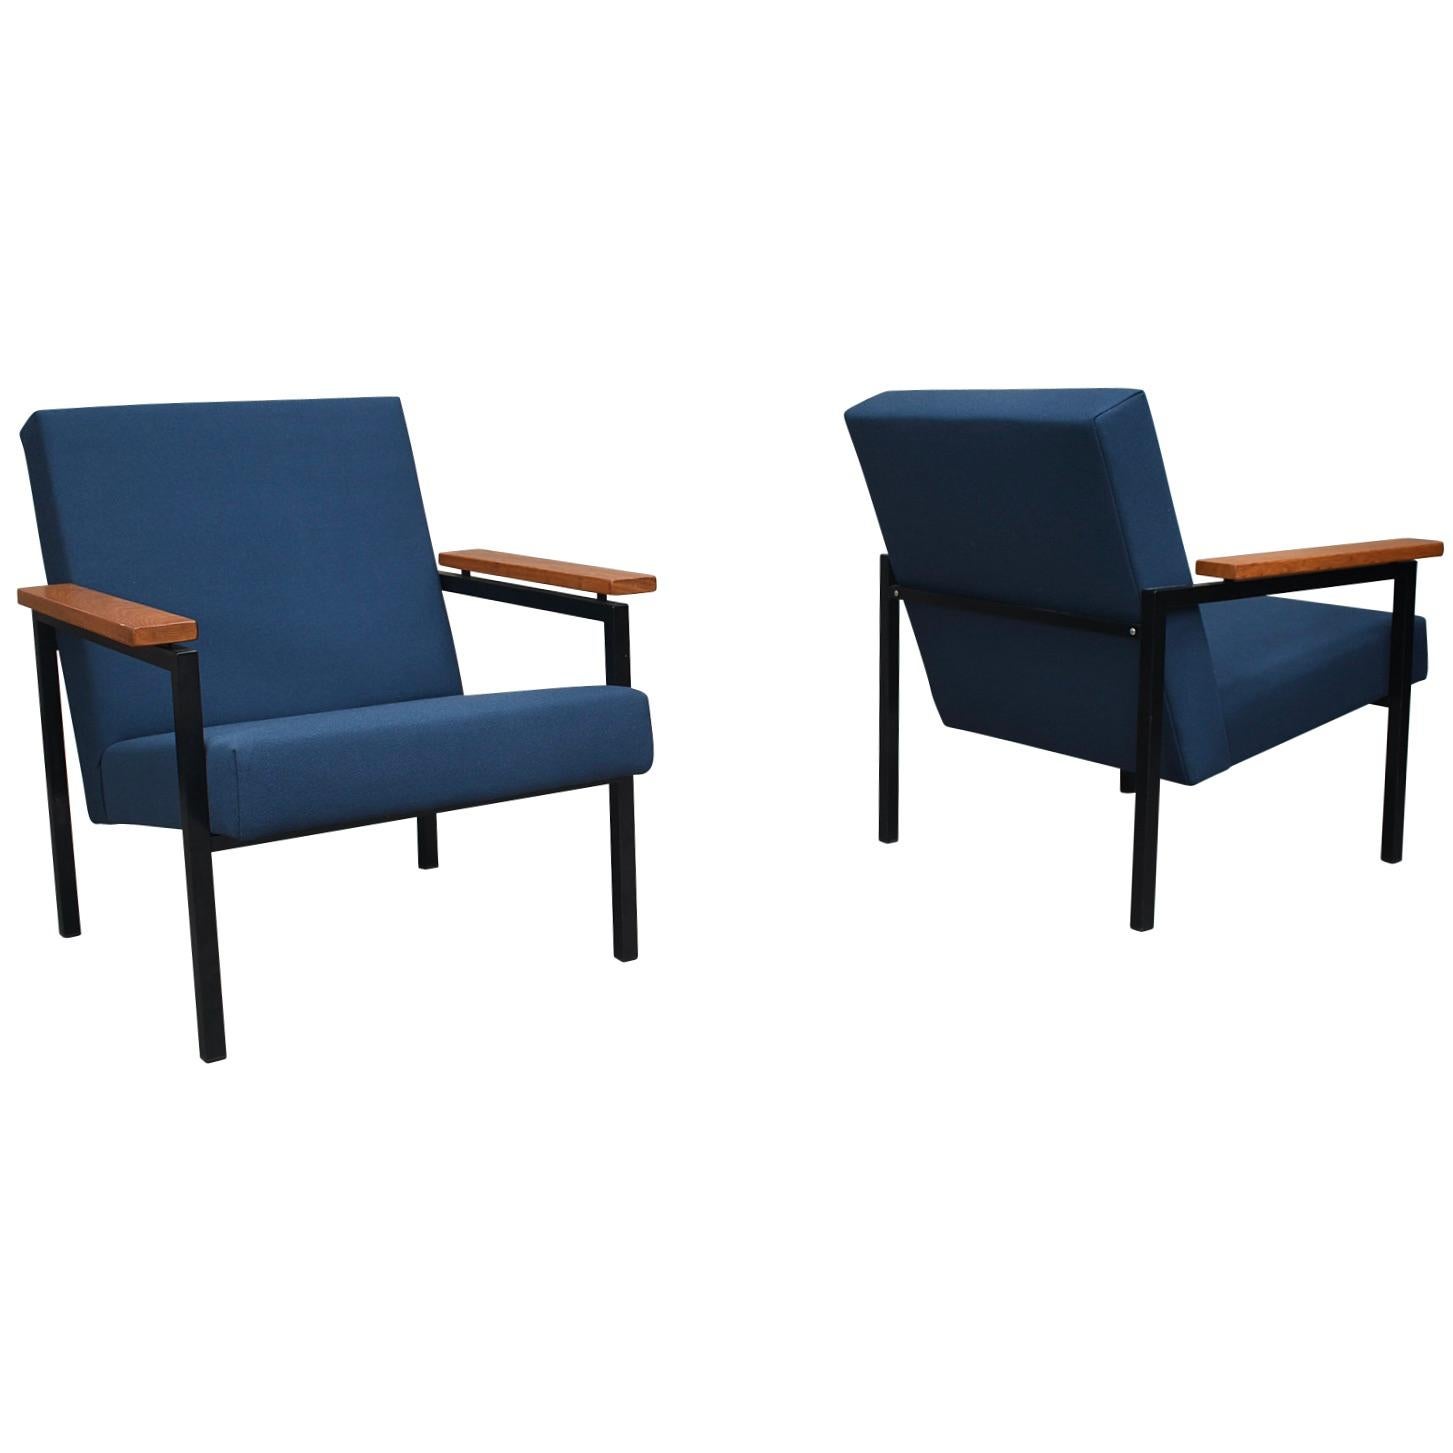 Minimalistic and timeless pair of lounge chairs by Gijs van der Sluis. The chairs have been reupholstered in Steelcut Trio fabric by KVADRAT. Other options also available.

Designer: Gijs van der Sluis

Country: Netherlands

Model: model 30